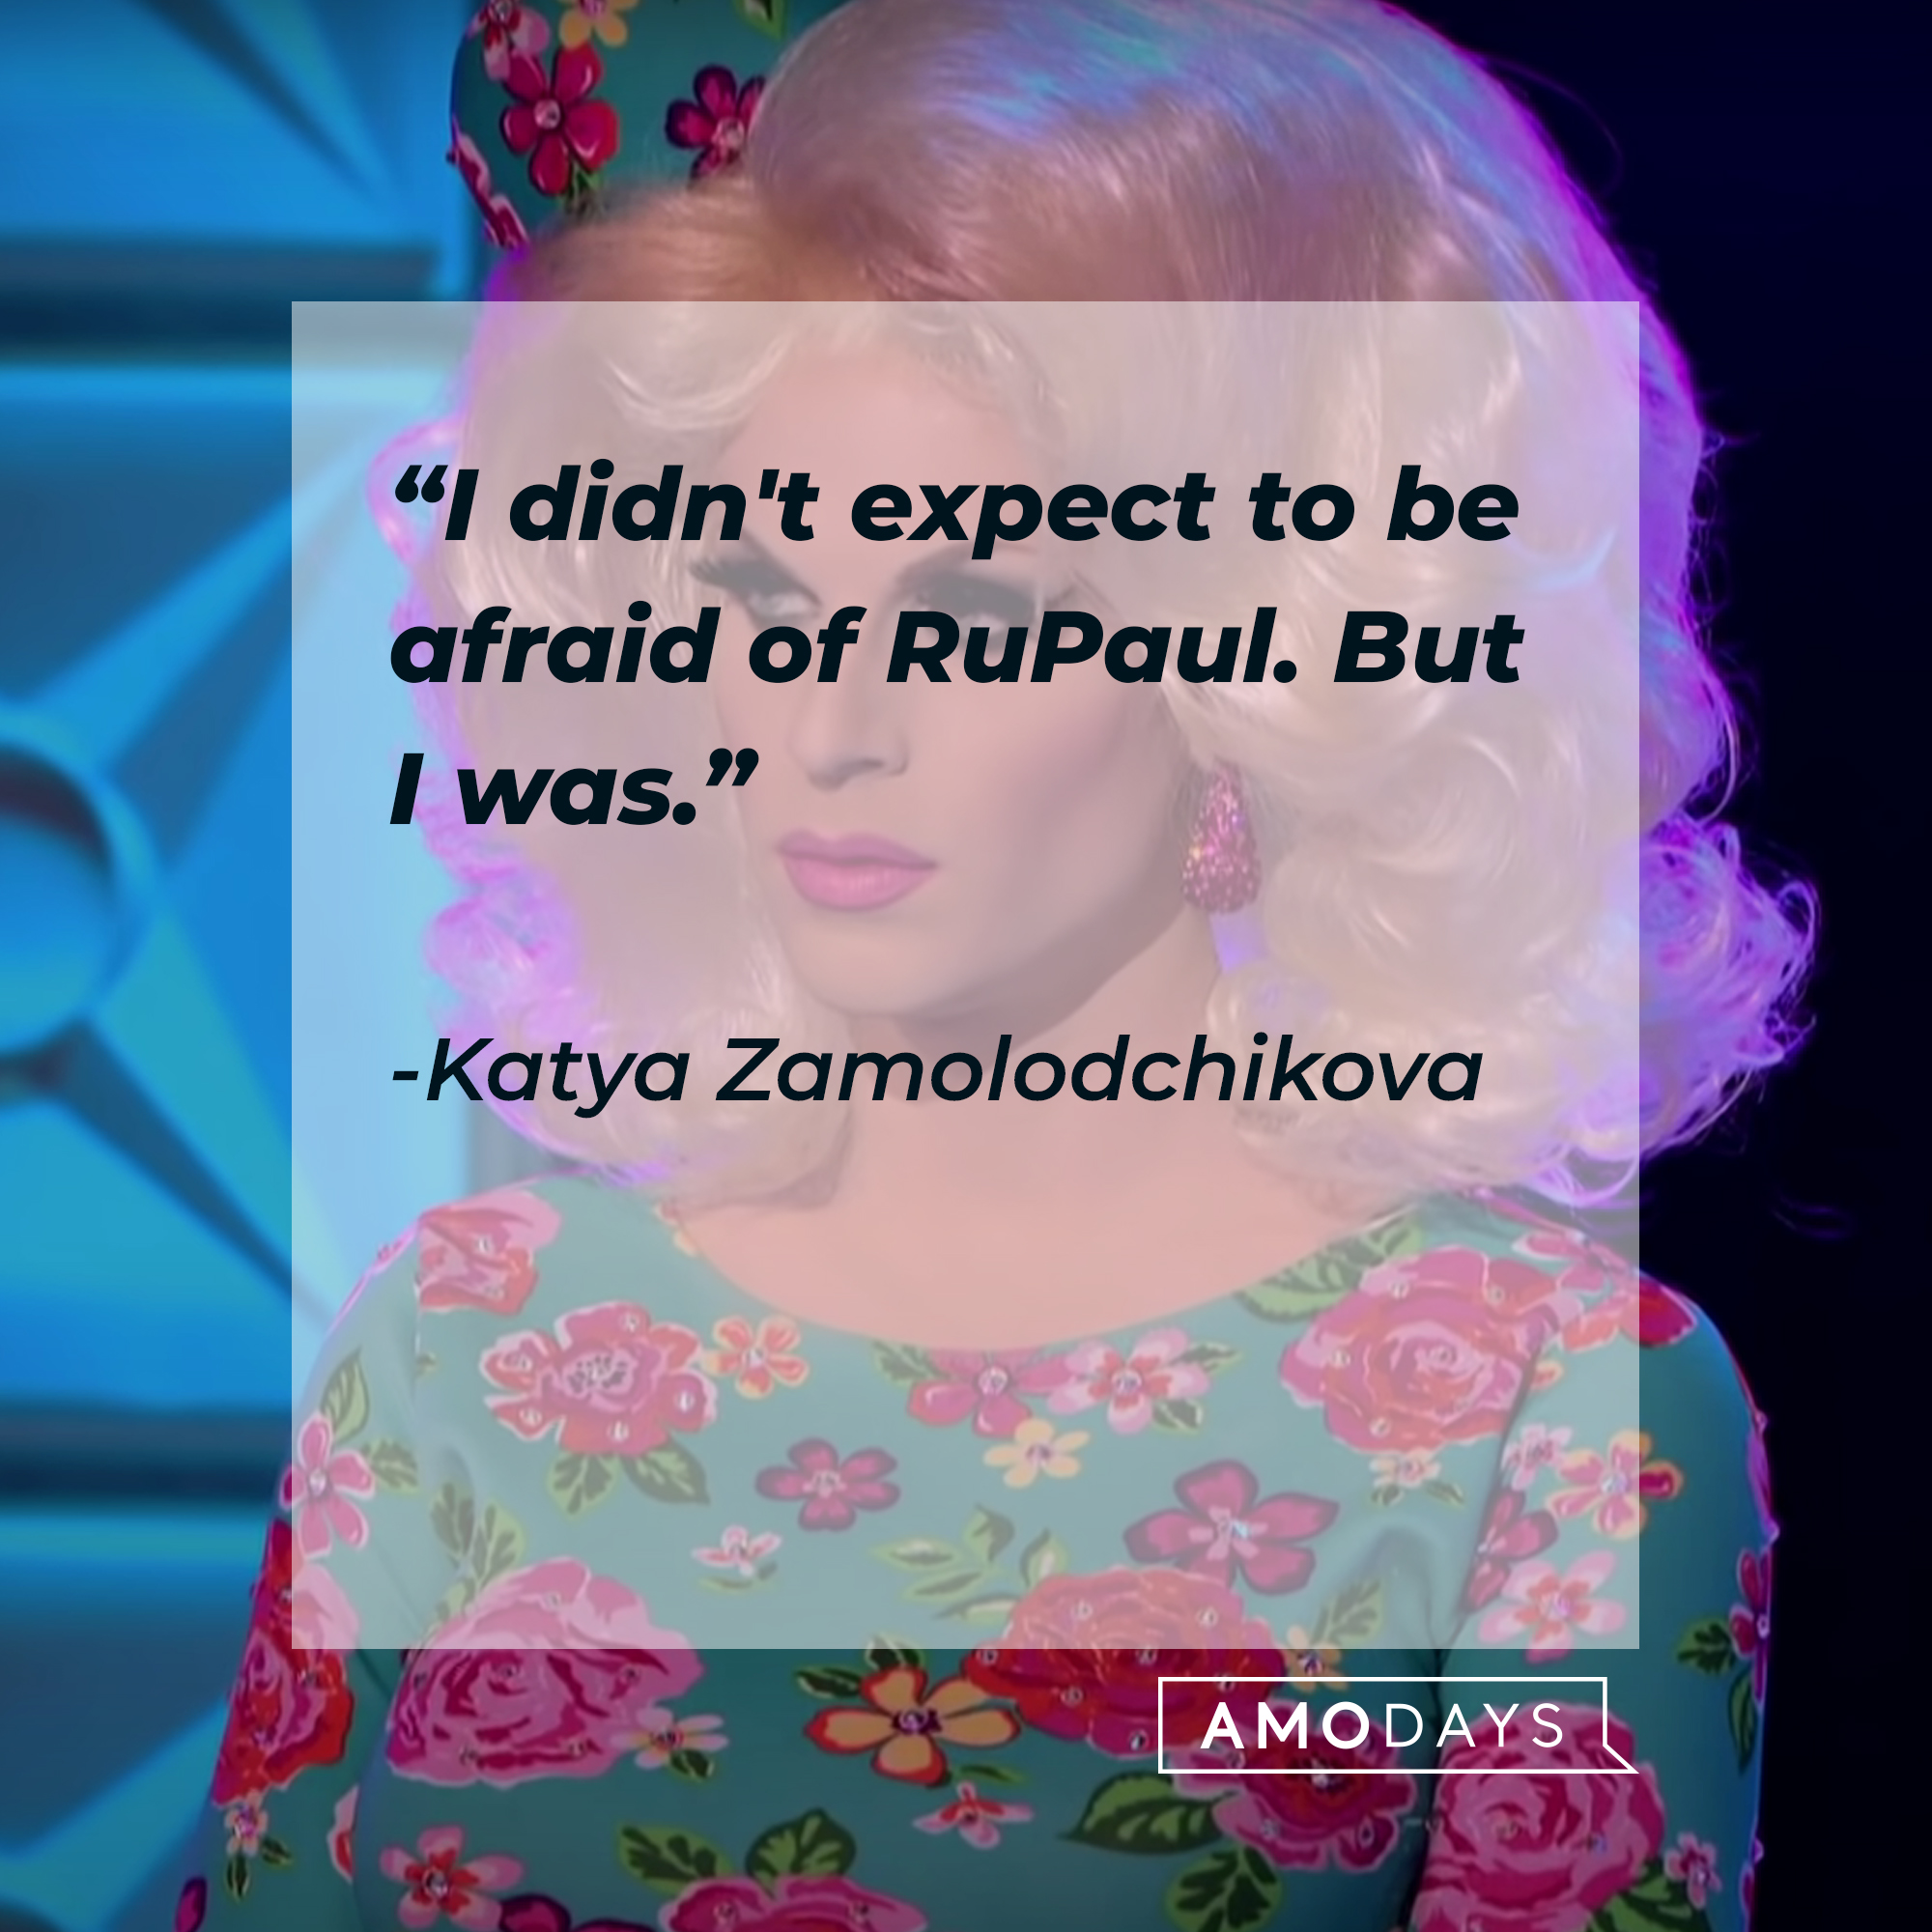 Katya Zamolodchikova, with her quote: “I didn't expect to be afraid of RuPaul. But I was.” | Source: youtube.com/rupaulsdragrace